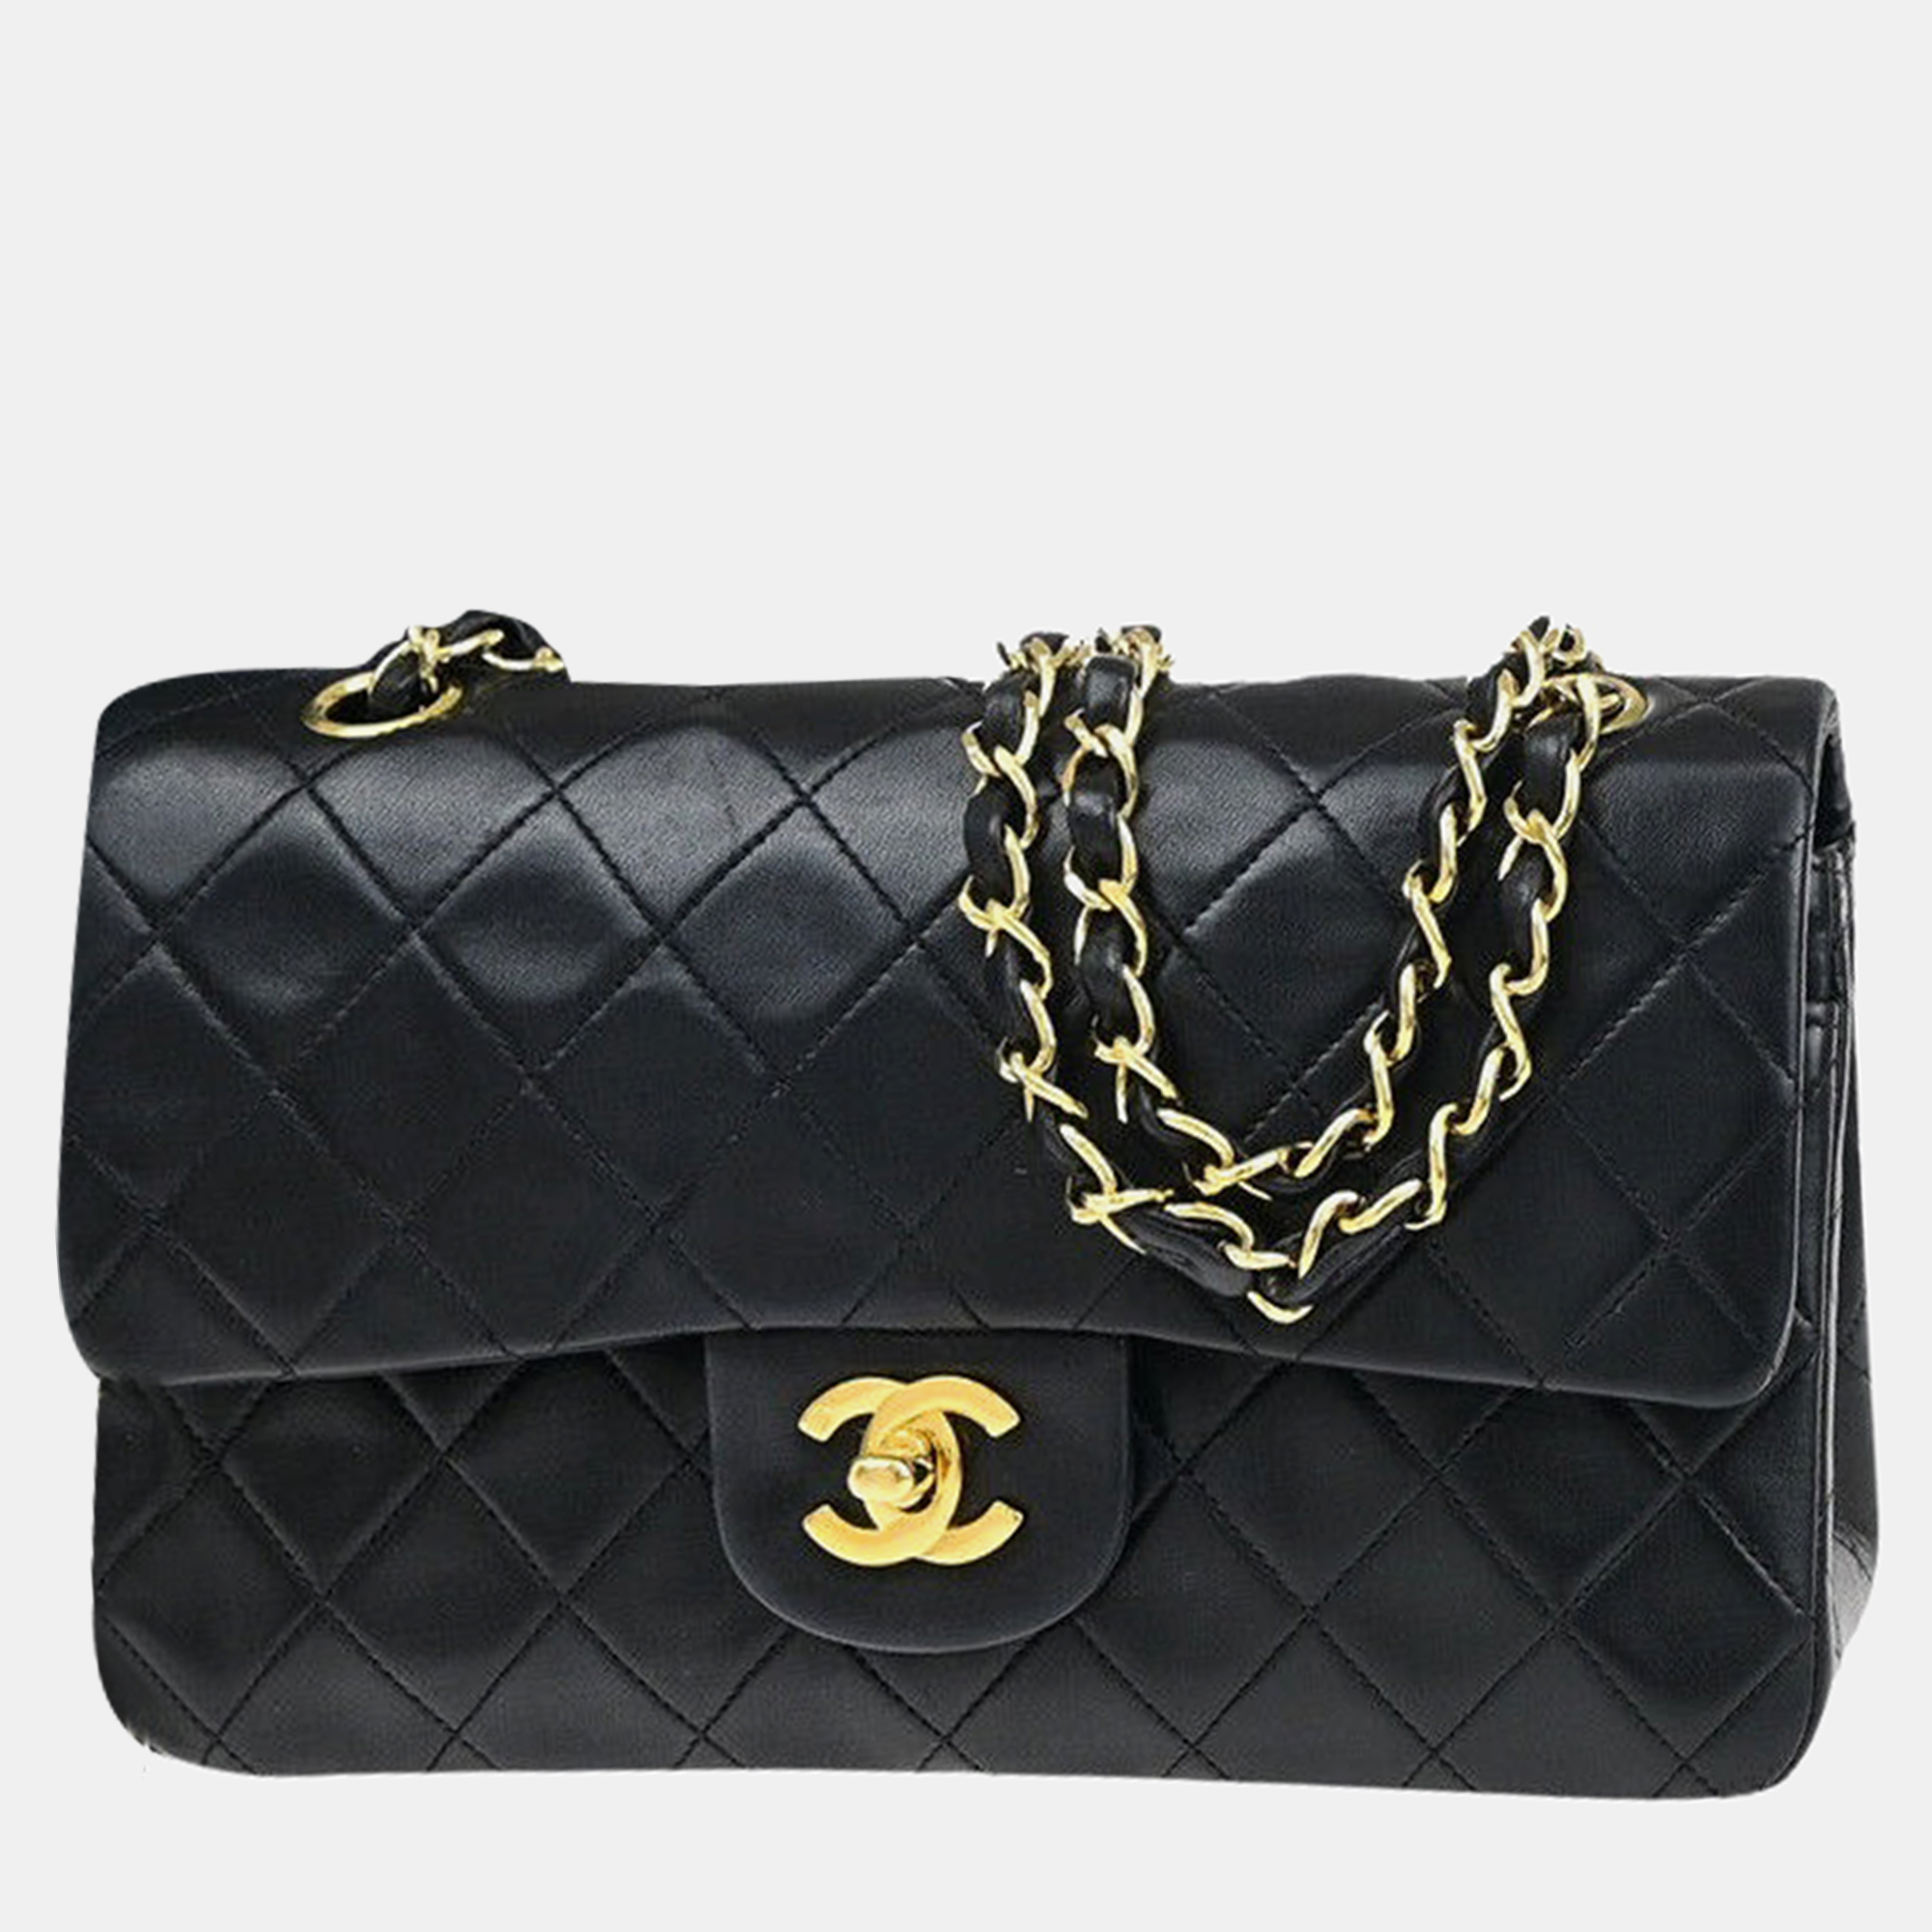 Chanel black leather small classic double flap bag